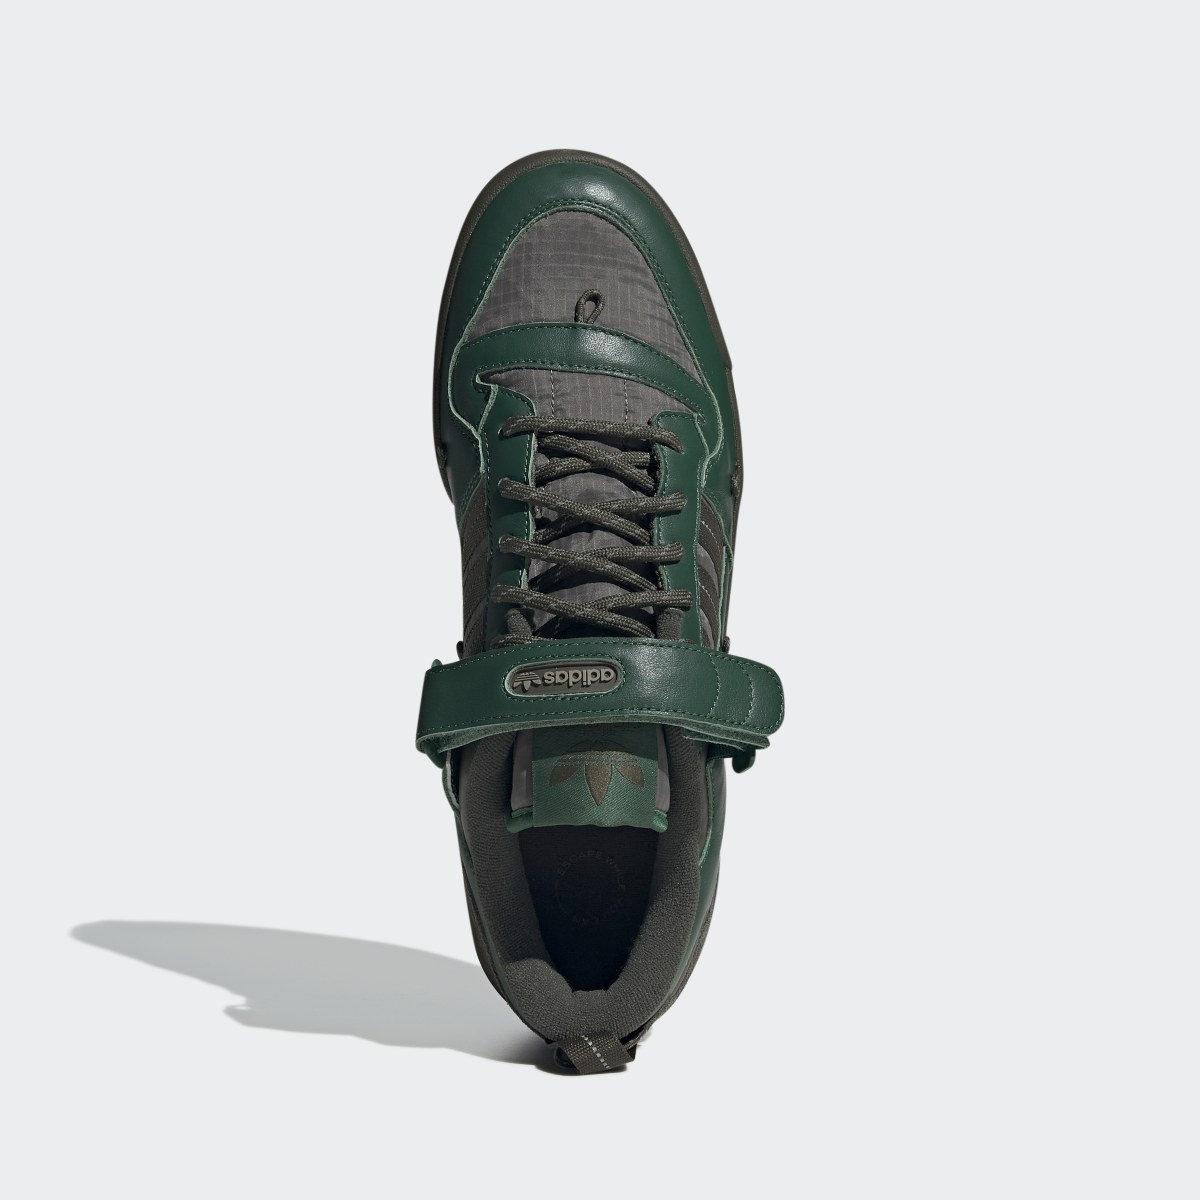 Adidas Forum 84 Camp Low Shoes. 5